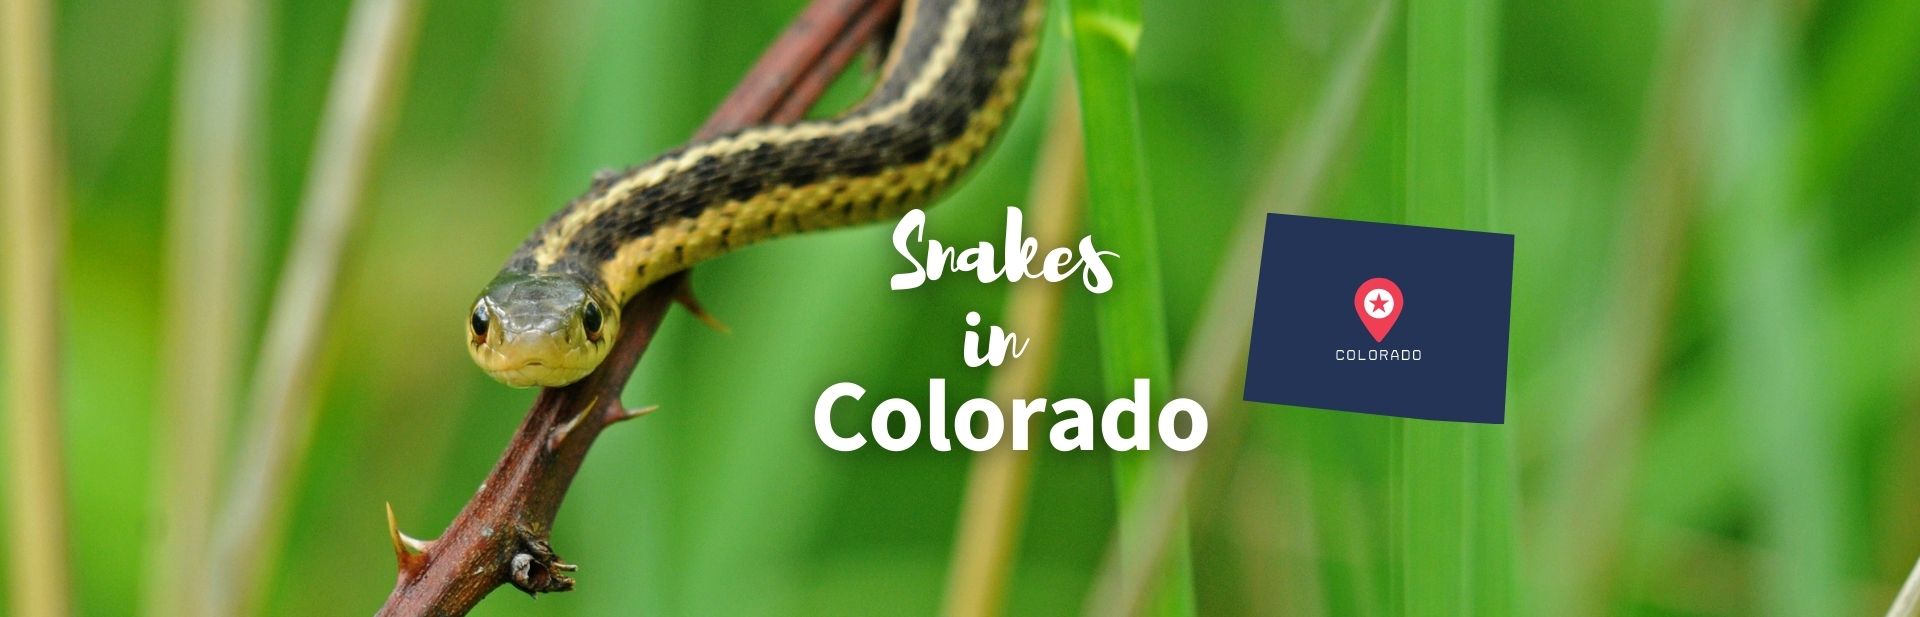 28 Snakes in Colorado: All You Need to Know (Pics & ID Guide)